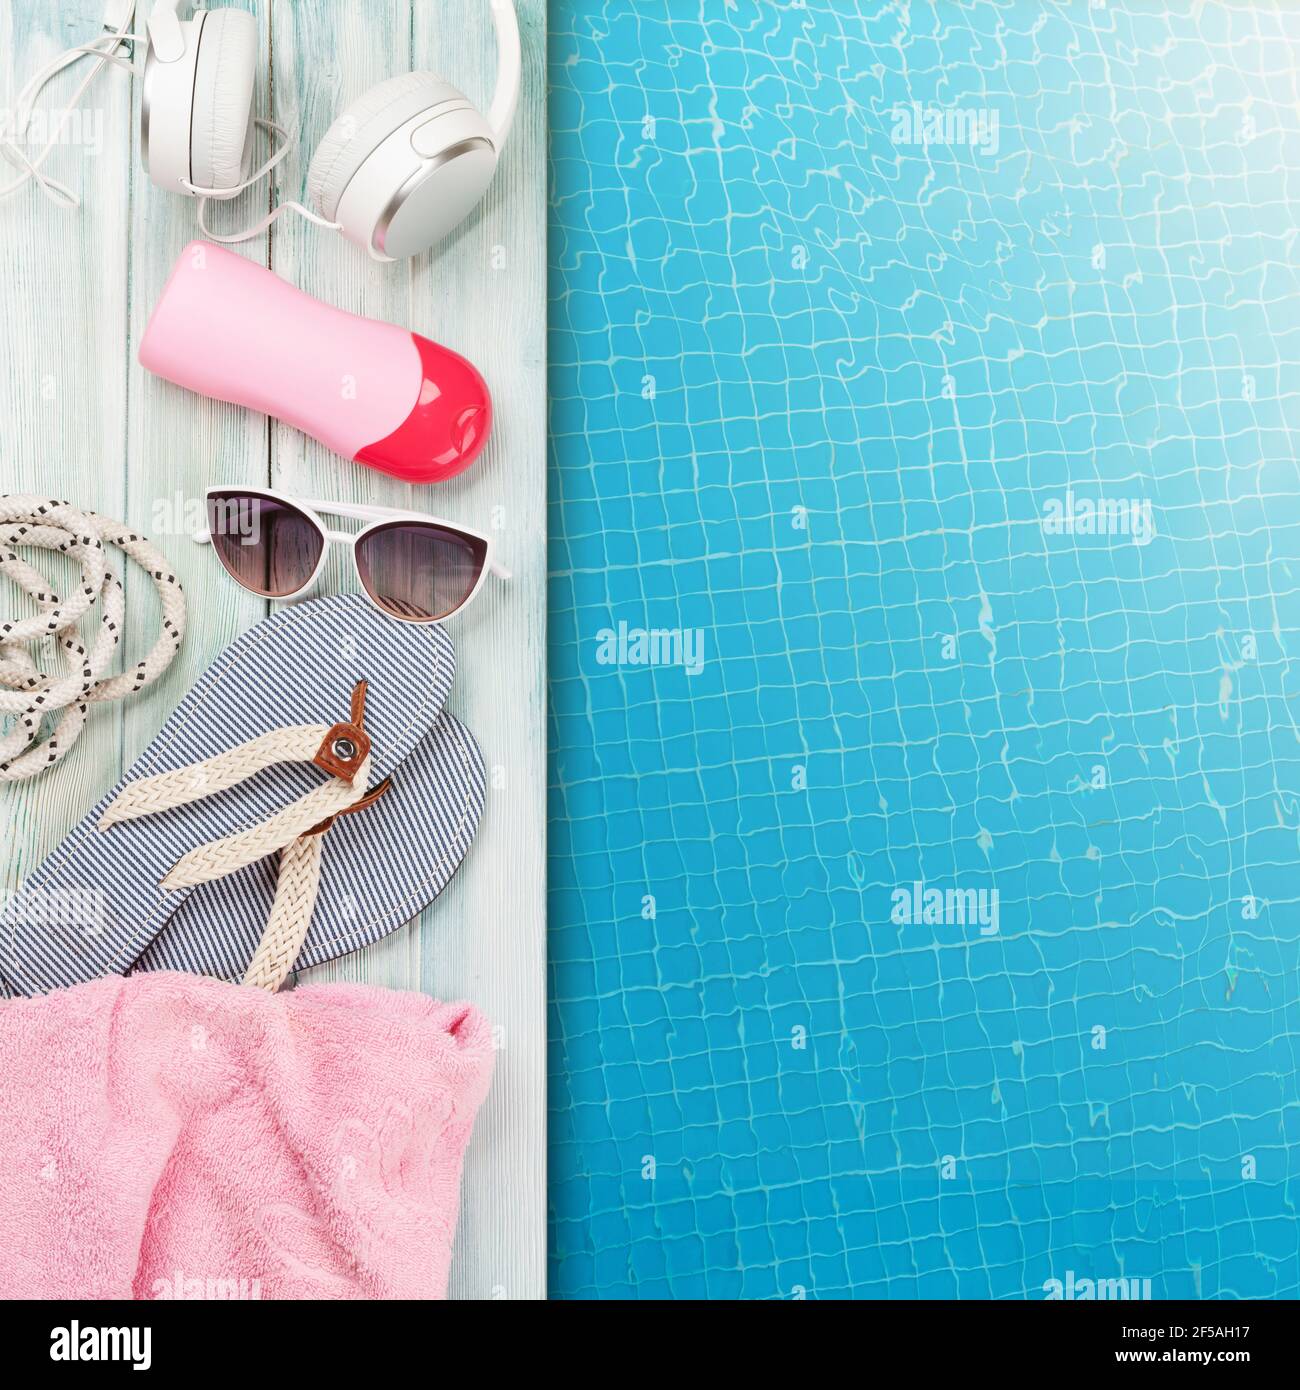 Pool and beach items and water surface of swimming pool. Travel and vacation concept. Top view flat lay with copy space Stock Photo